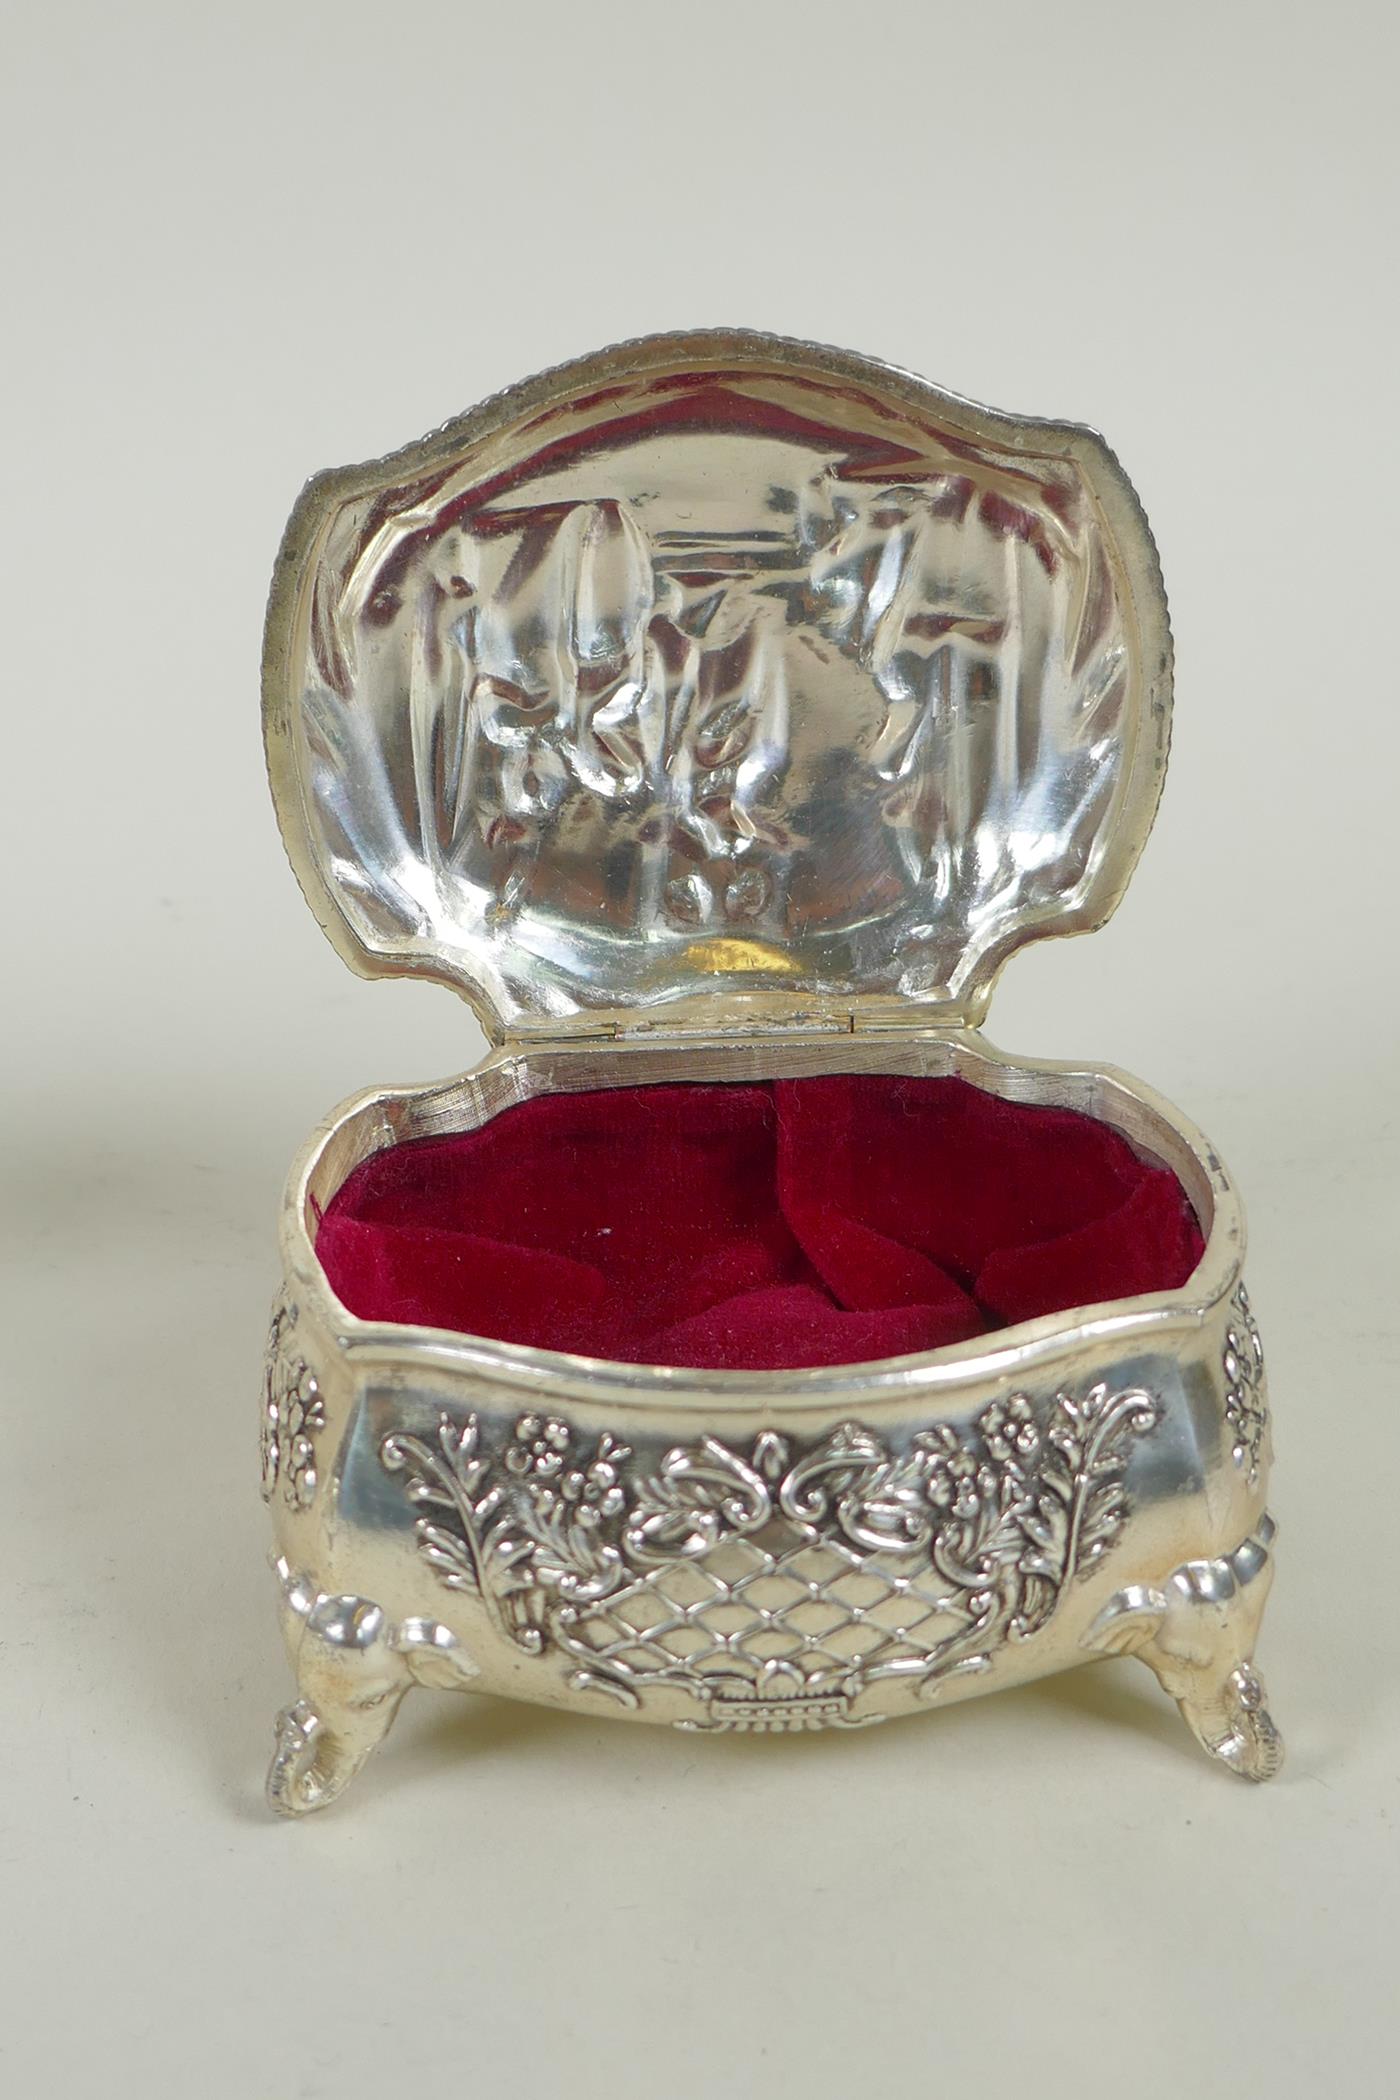 A pair of Mappin & Webb silver plated salts, a silver plated bombe shaped jewellery casket and a - Image 9 of 9